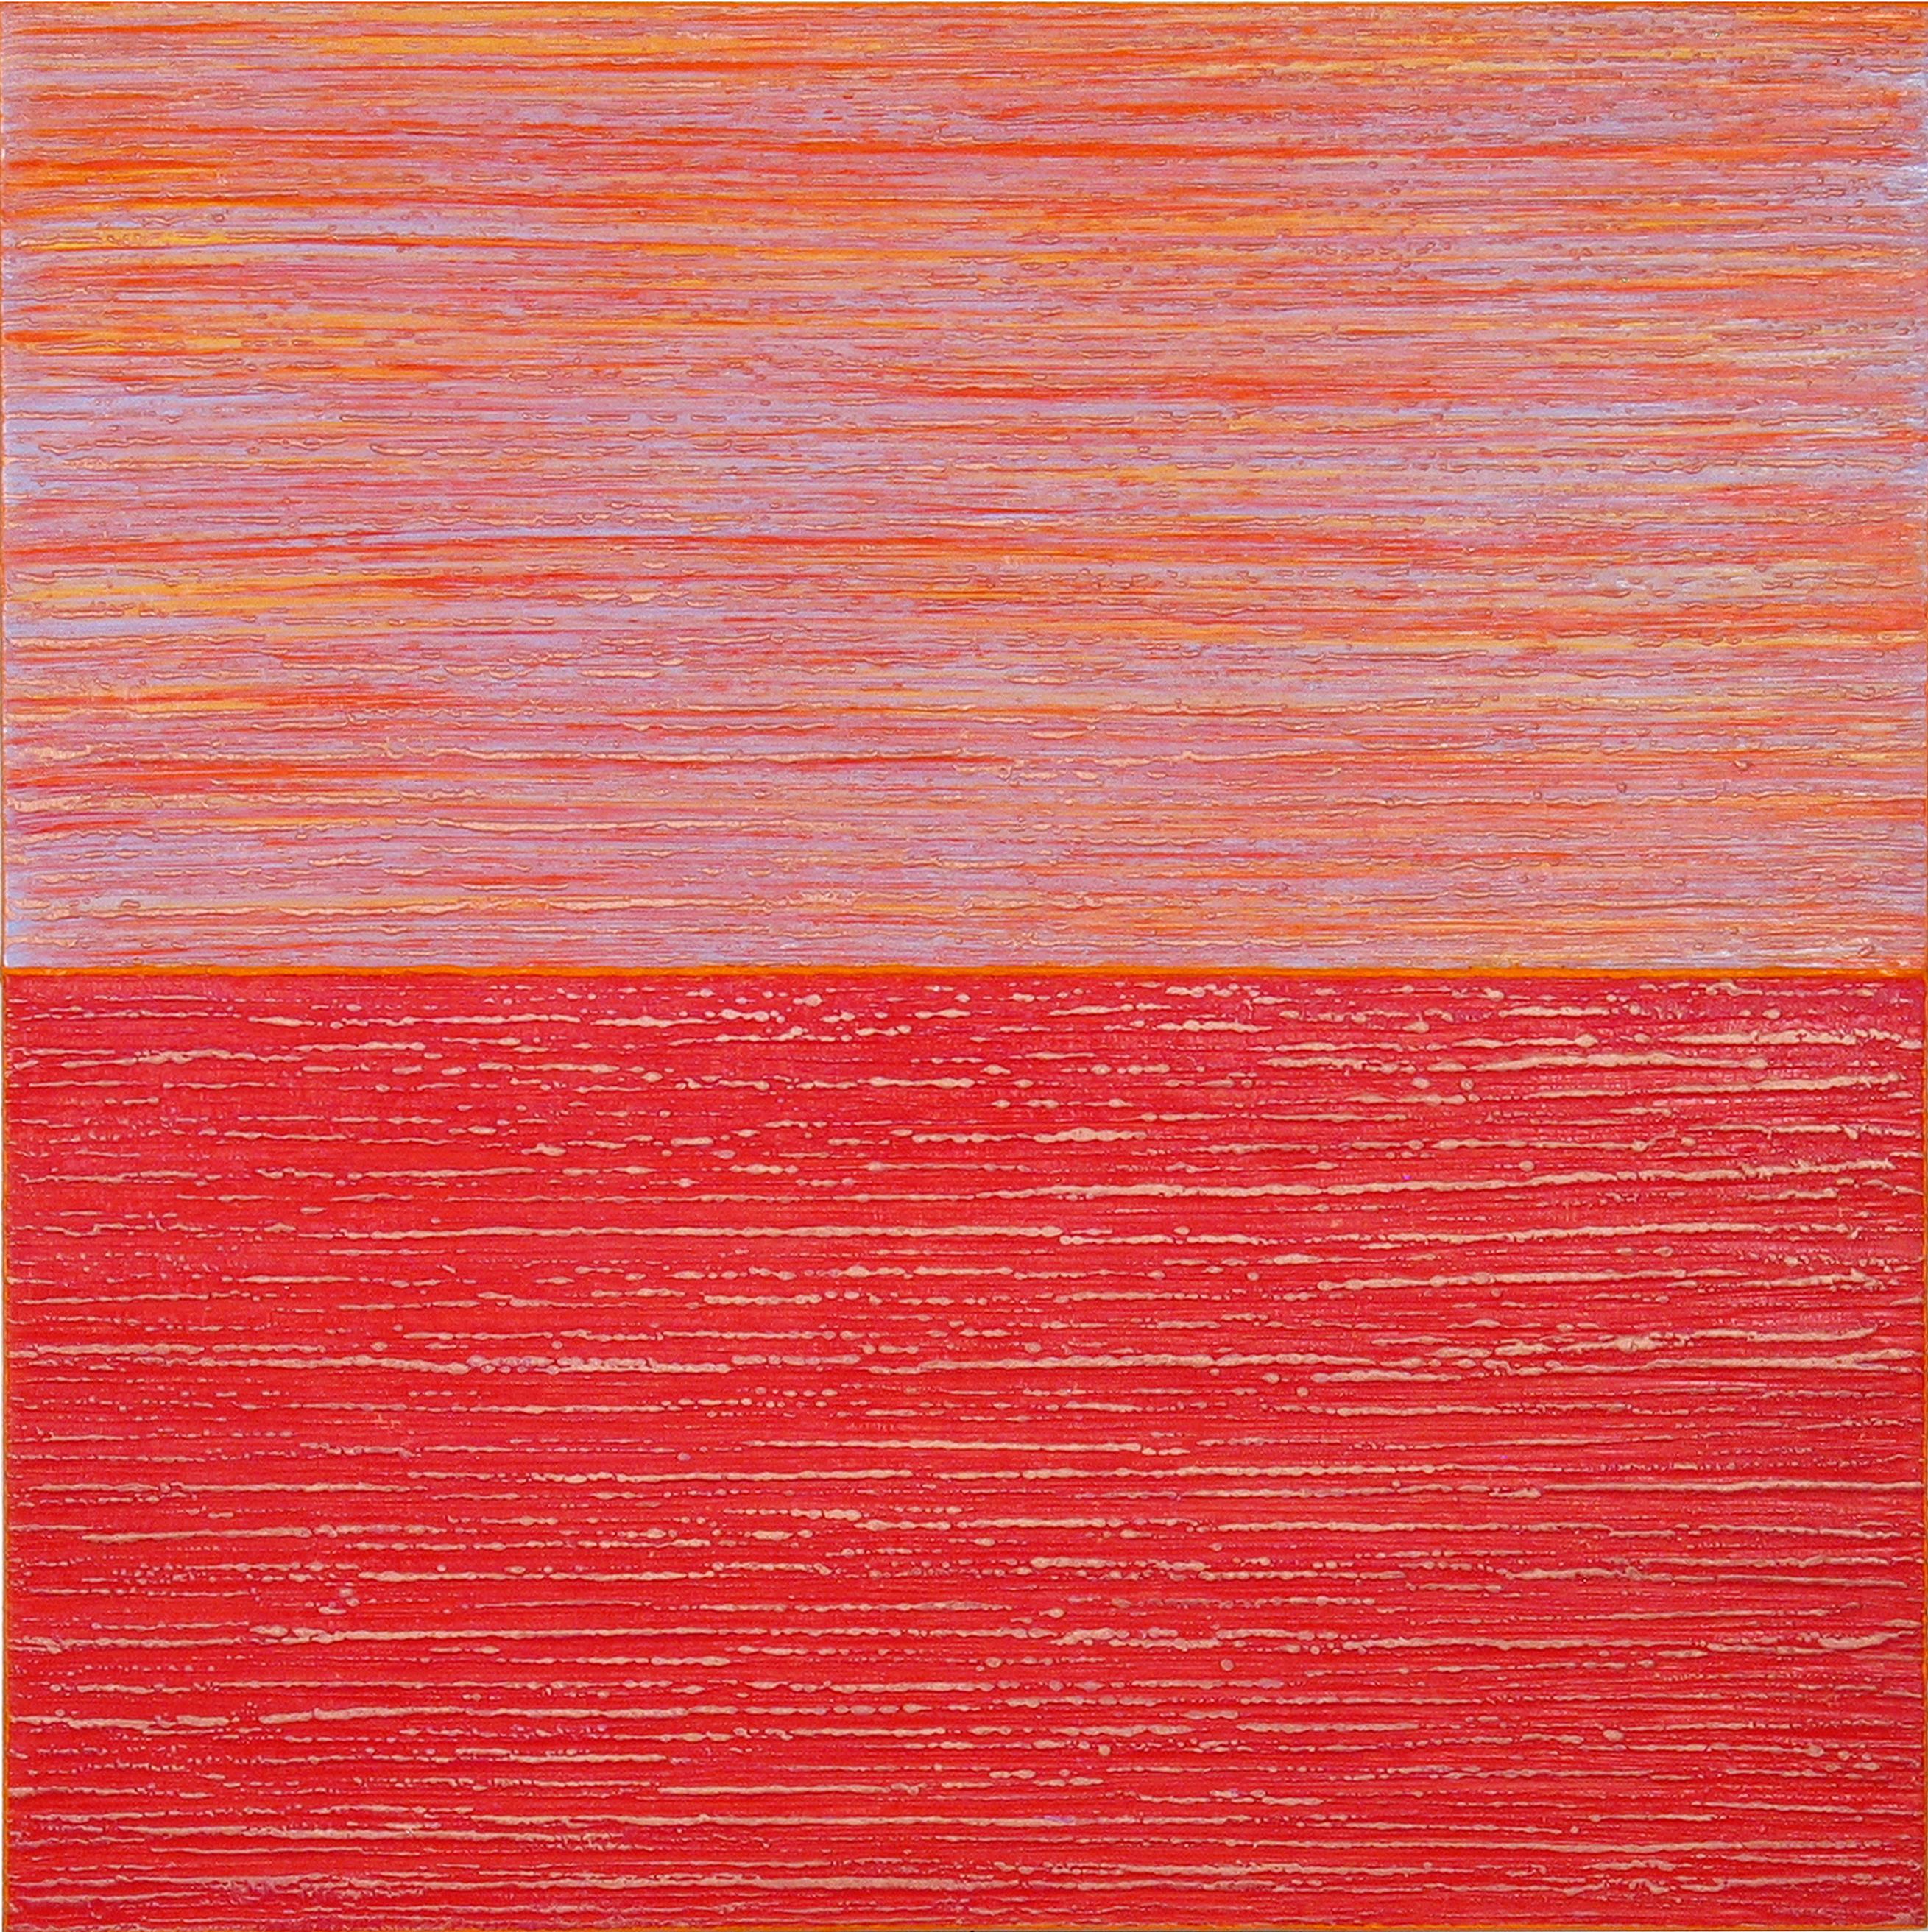 Joanne Mattera Abstract Painting - Silk Road 479, Square Color Field Painting, Iridescent Pink, Peach, Bright Red